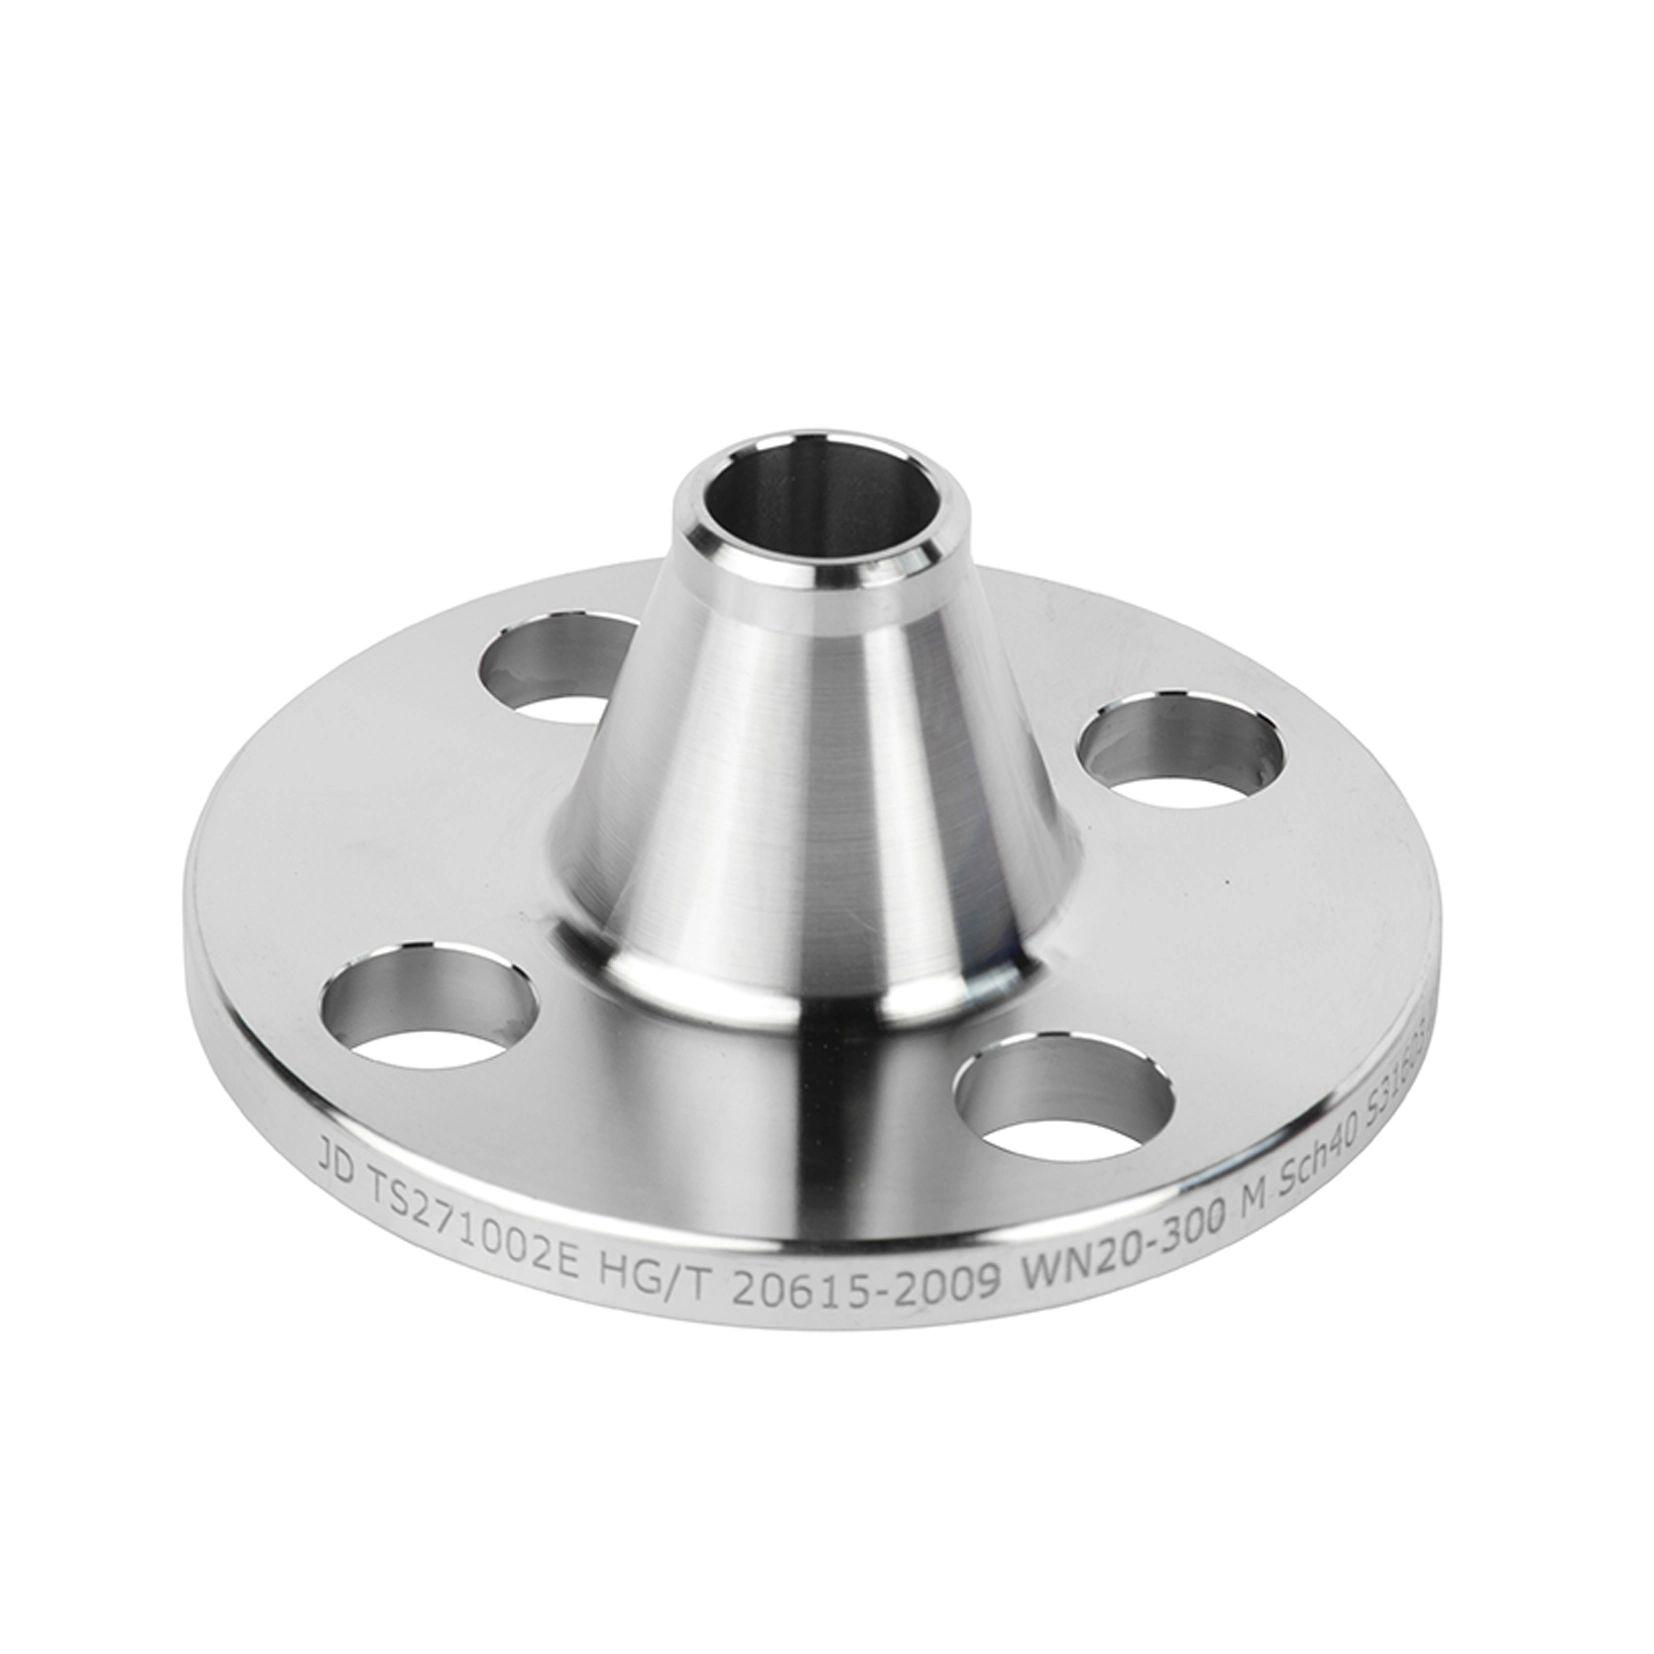 Pipe Fitting Stainless Steel Forged Flanges Welding Neck Flange for Connector